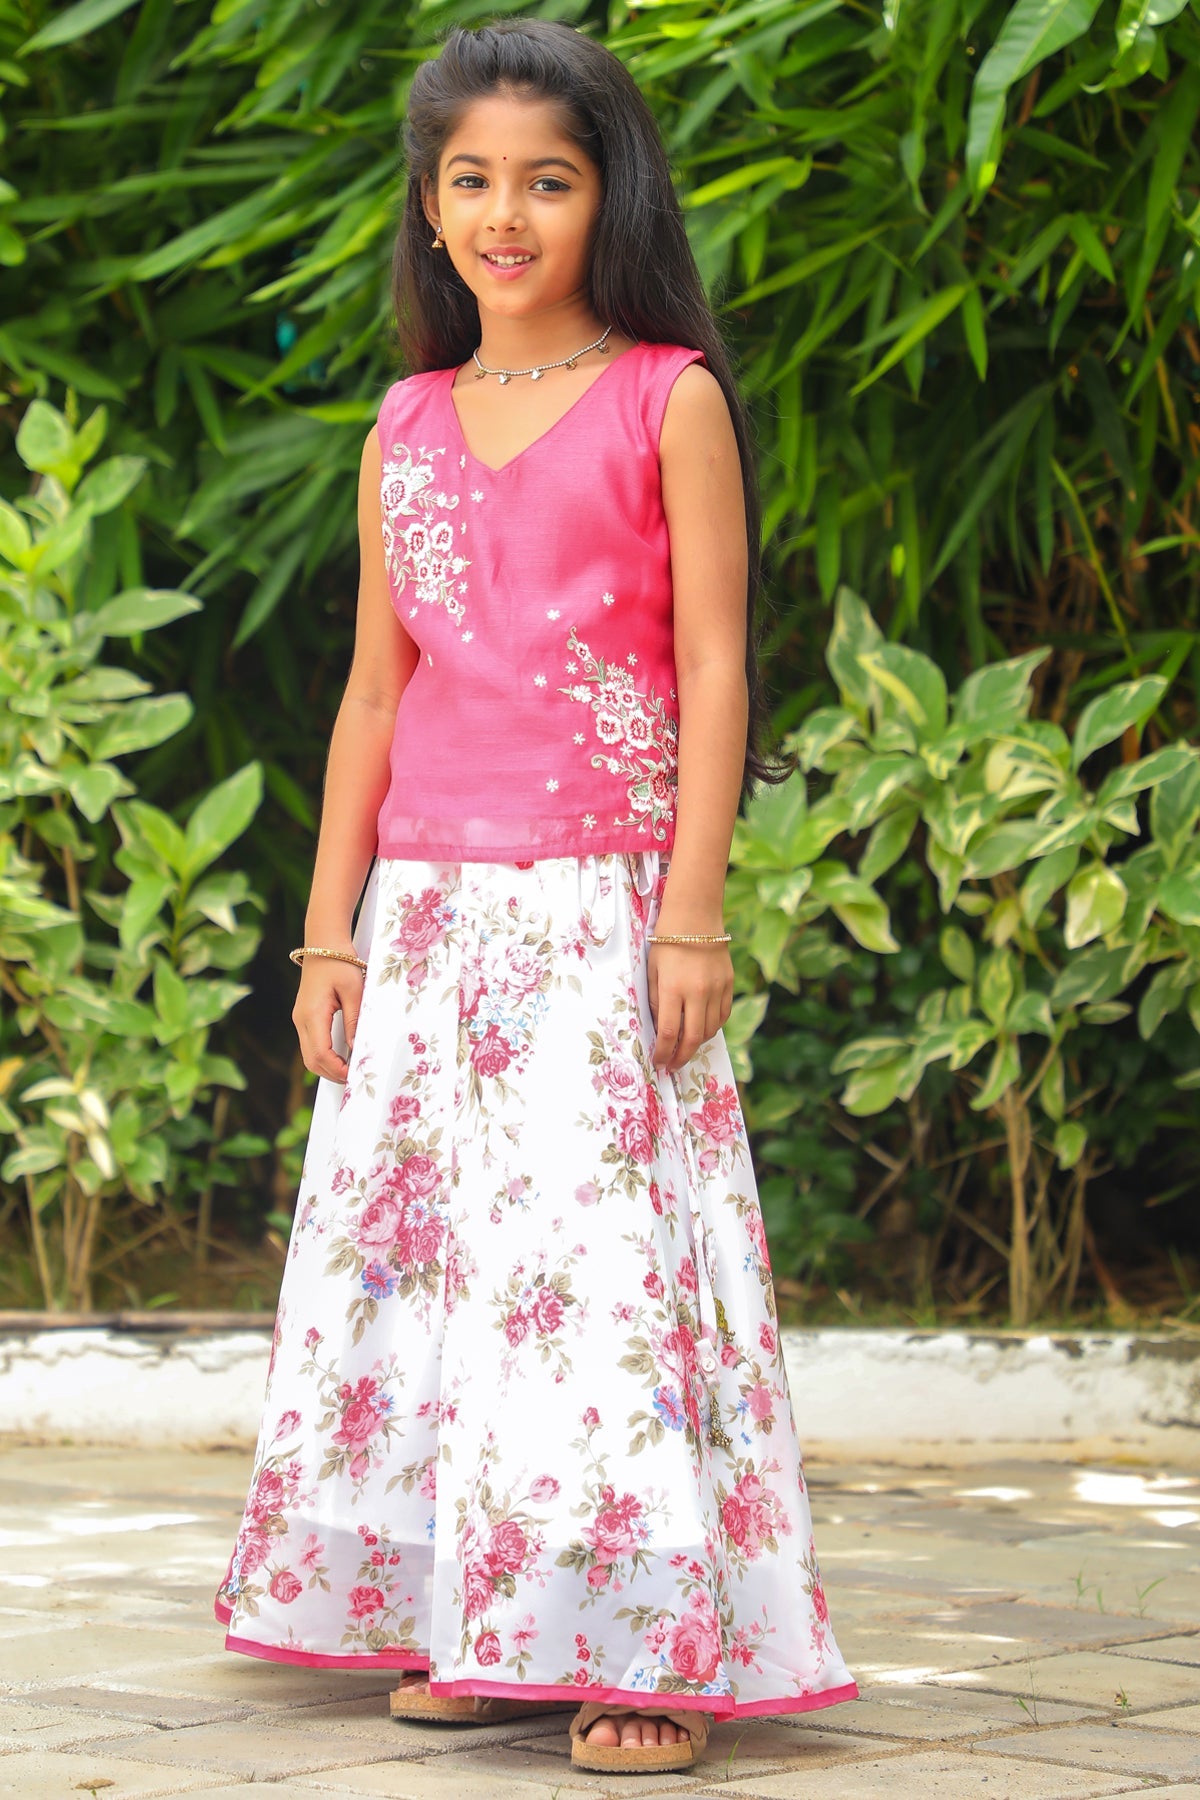 Floral Embroidered Sleeveless Top & All Over Vintage Floral Printed Skirt Set - Pink & White